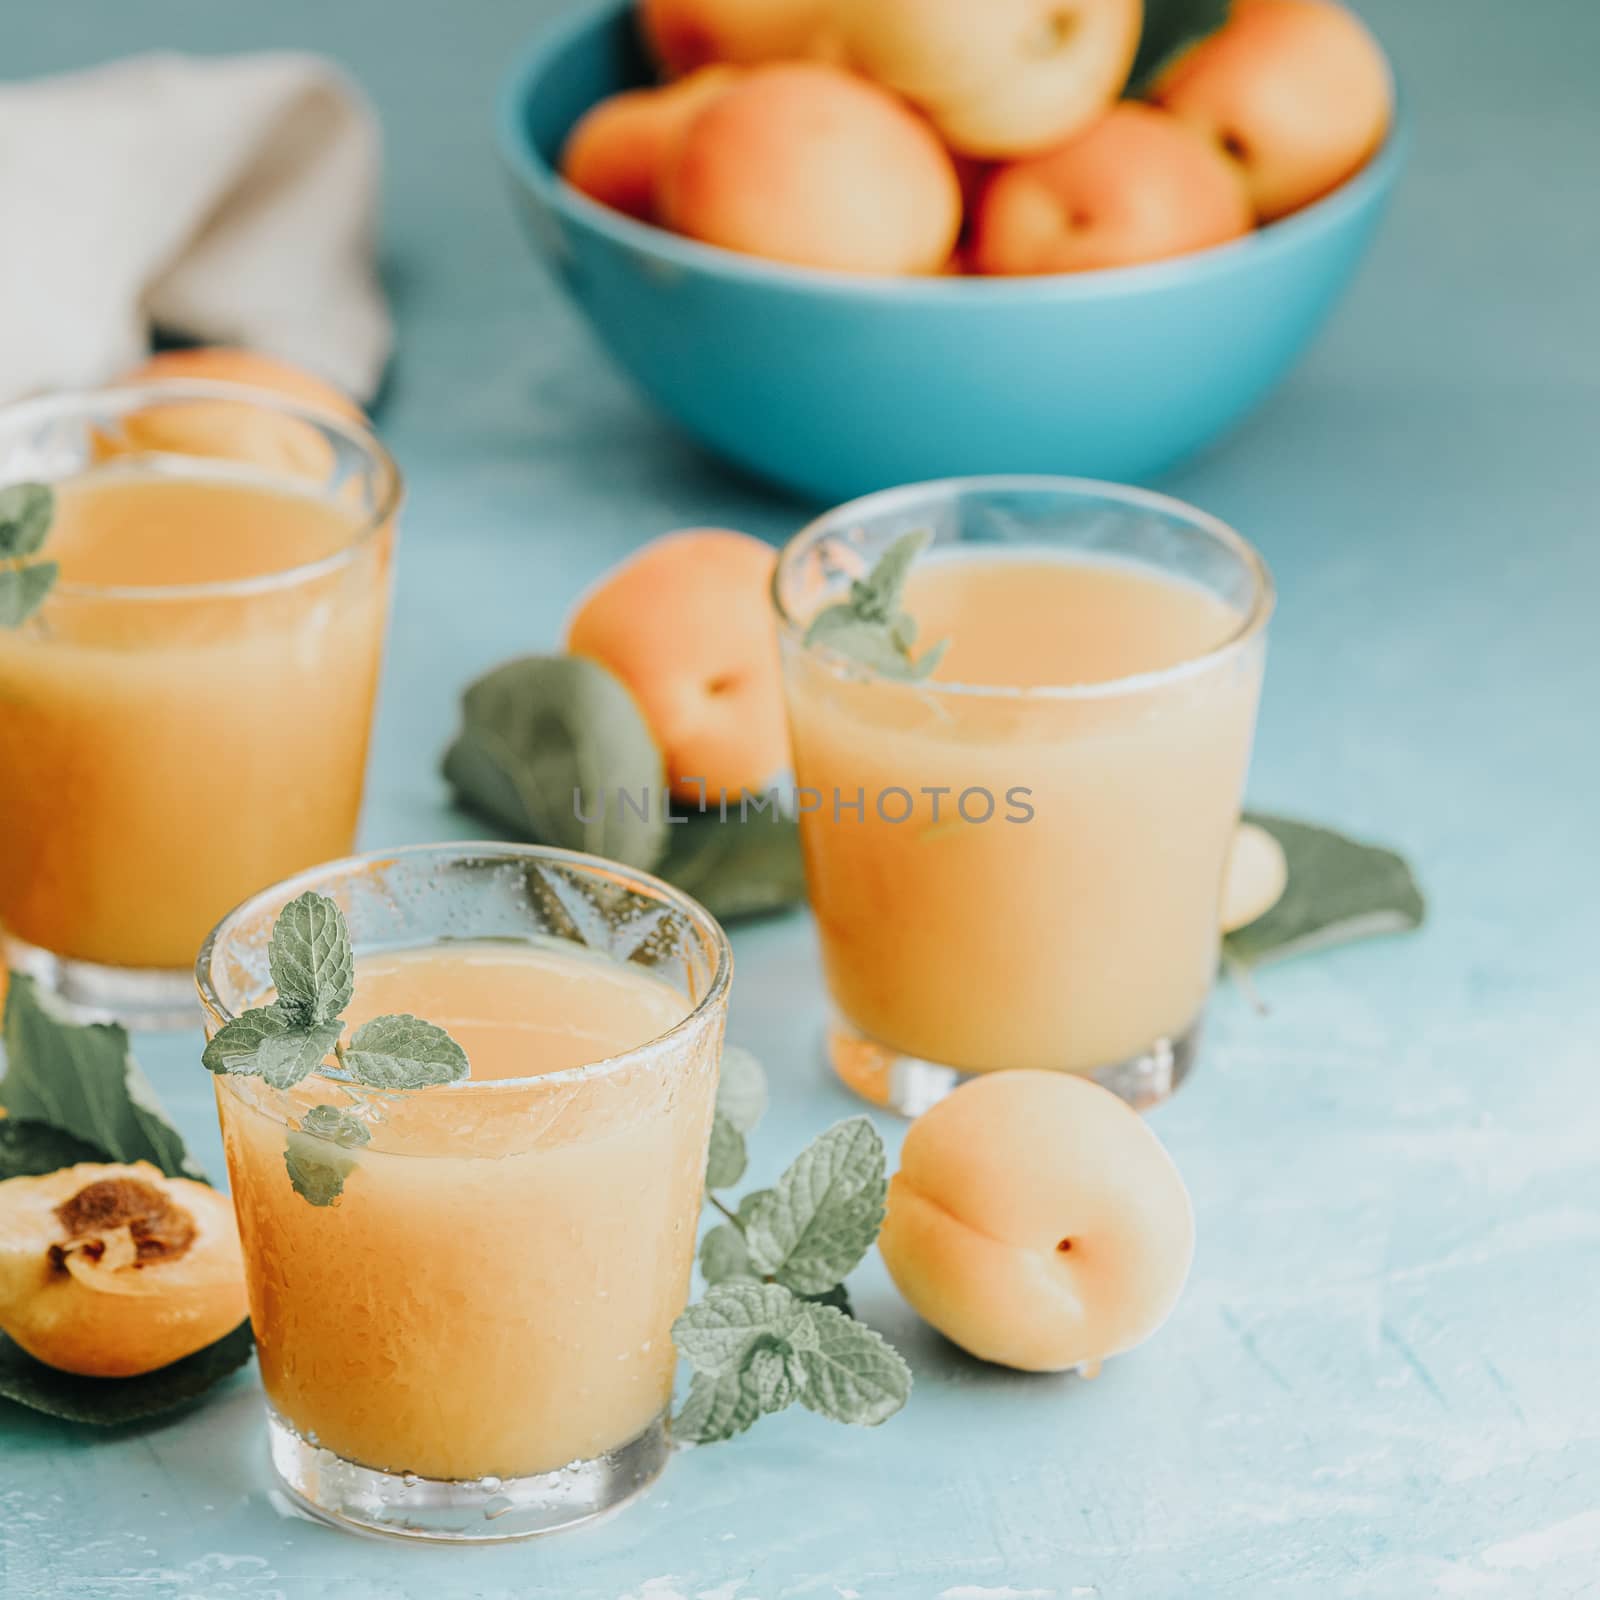 Glass of fresh healthy apricot juice in sunny light on blue surf by ArtSvitlyna